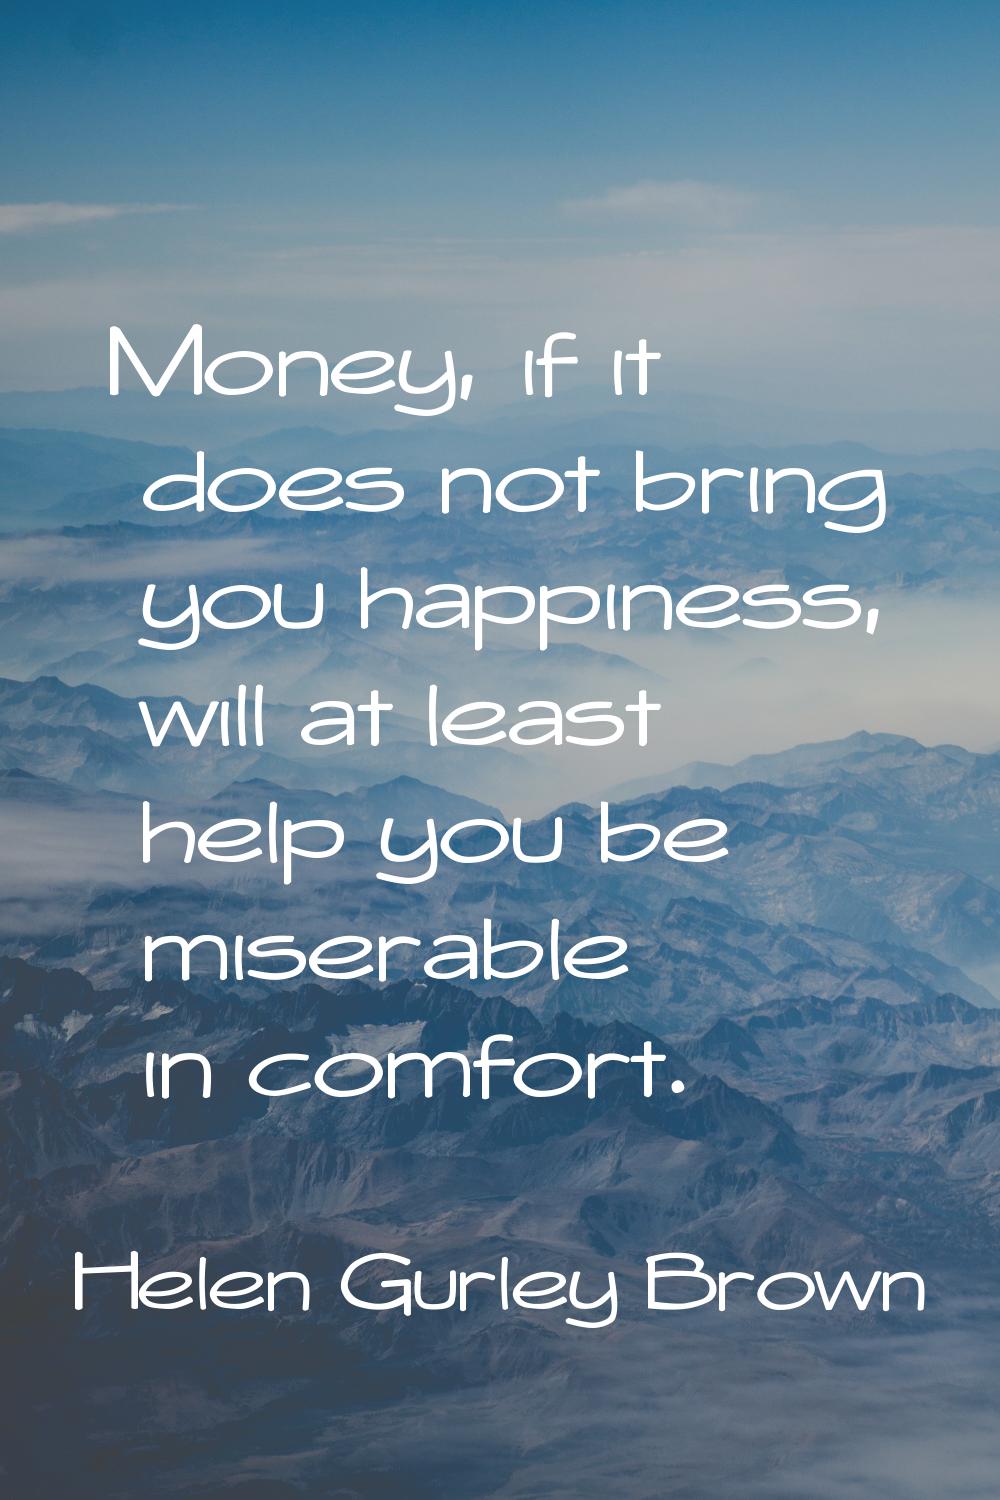 Money, if it does not bring you happiness, will at least help you be miserable in comfort.